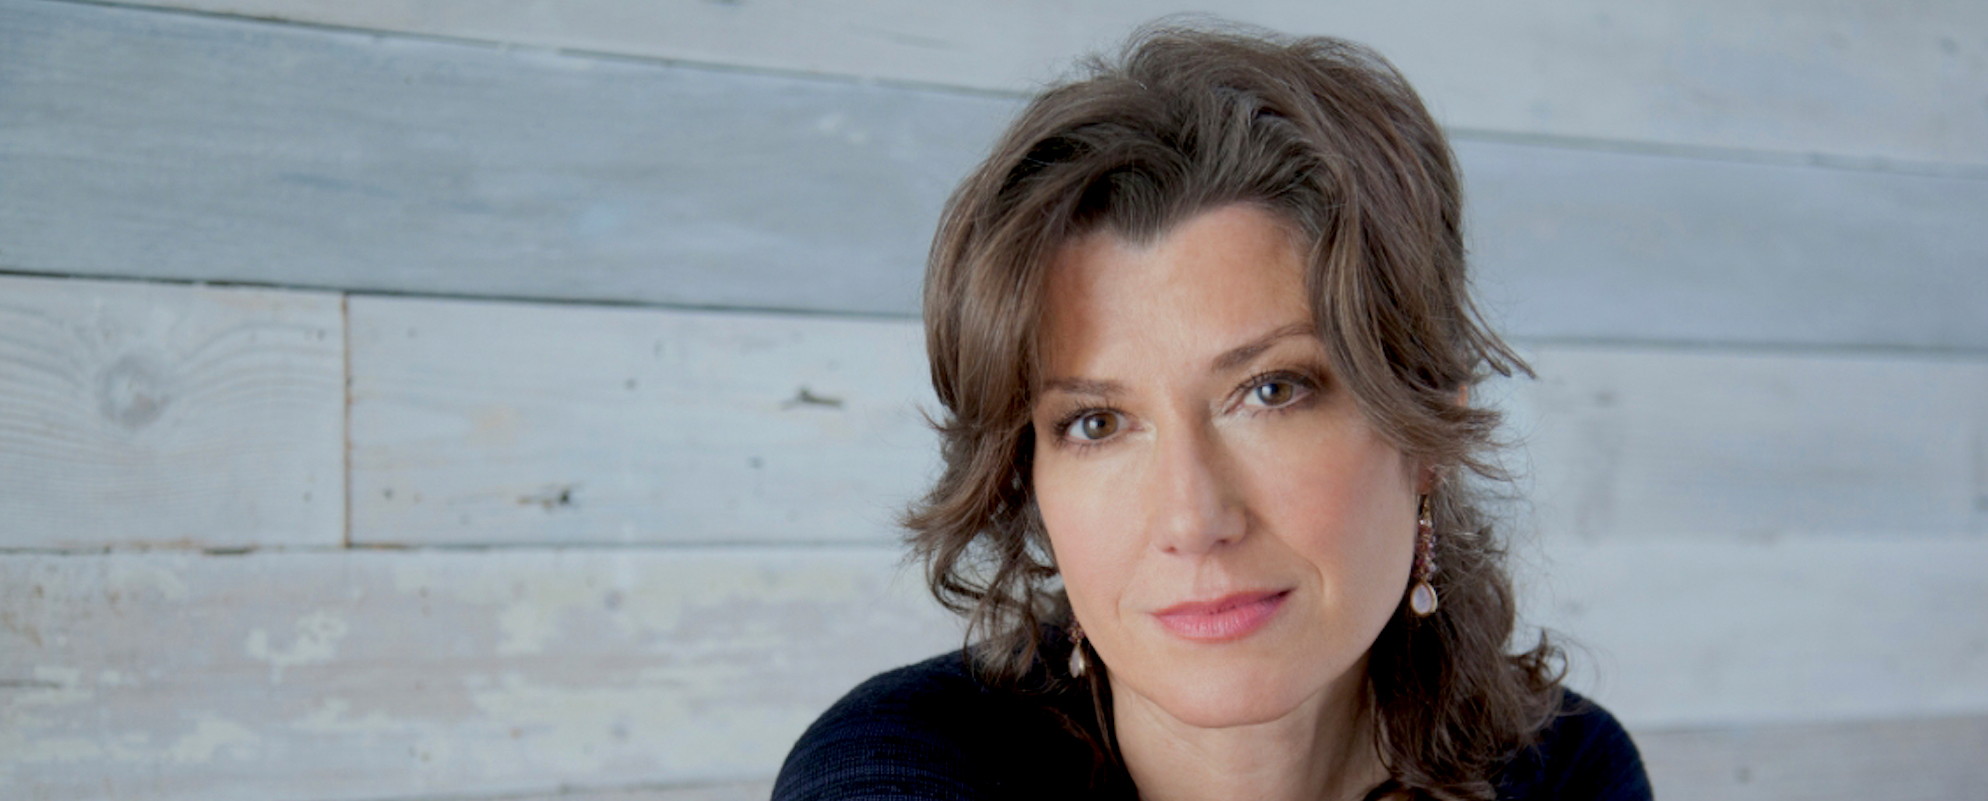 Behind the Song Lyrics: “Ask Me” by Amy Grant